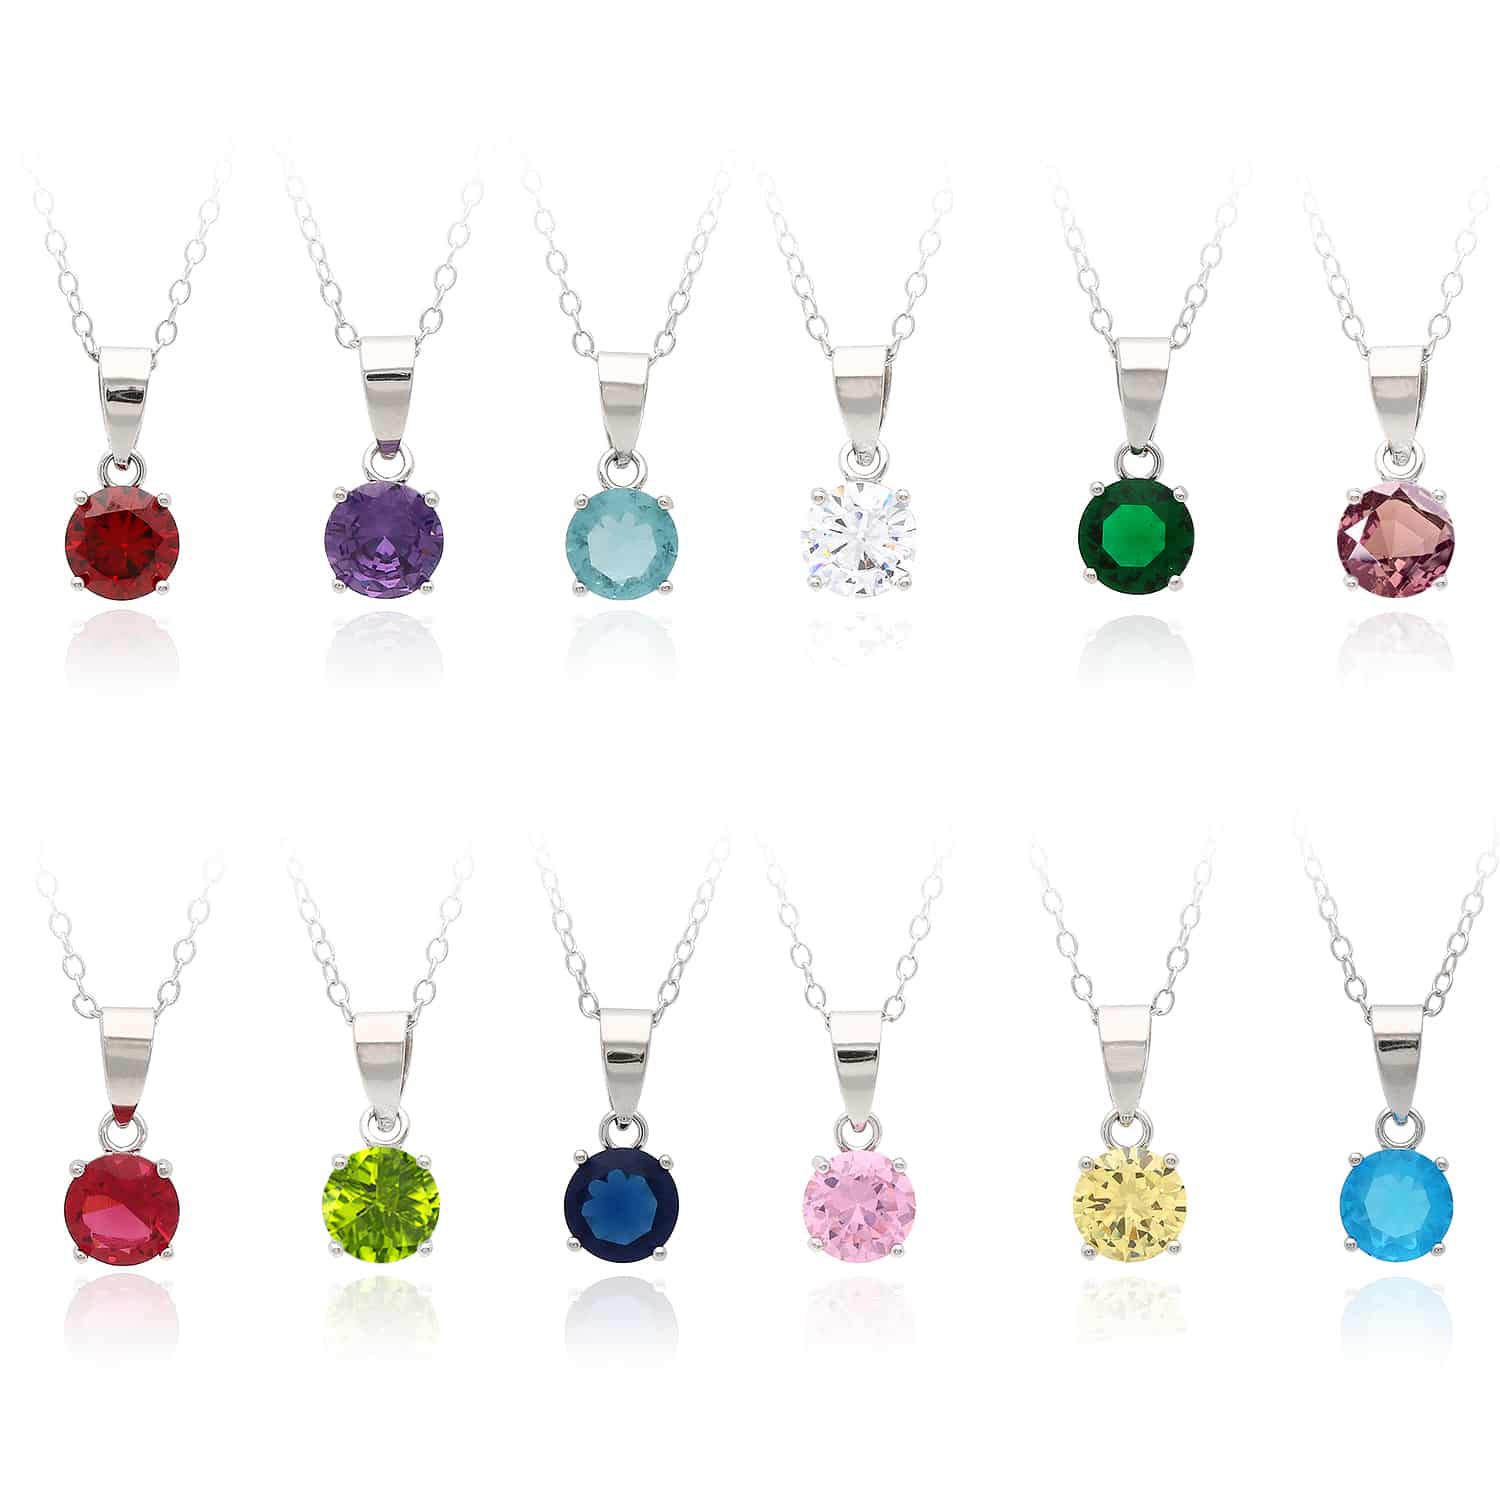 Sterling Silver Round-Cut Solitaire Birthstone Pendant Chain Necklace 16-18" Adj - May - Emerald